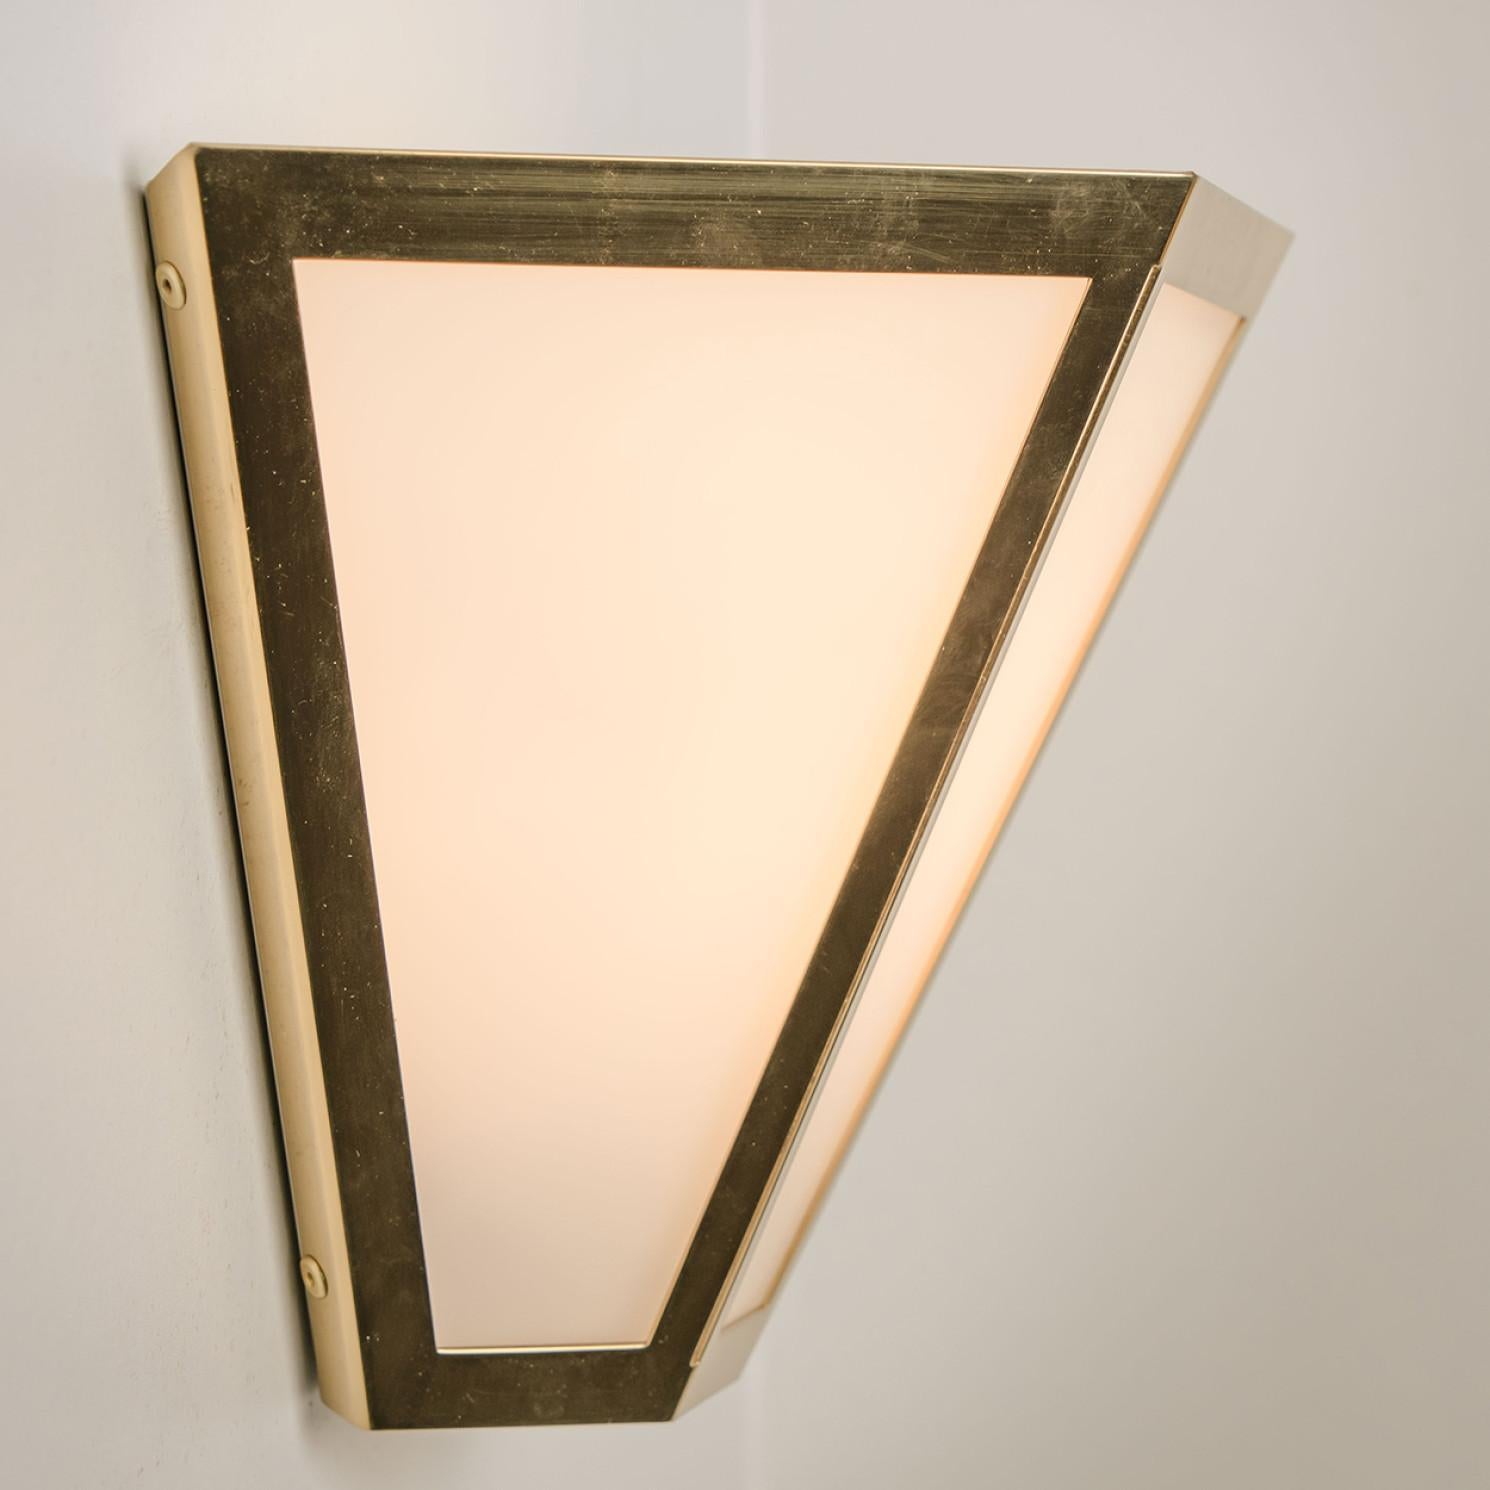 German White Glass and Brass Pyramid Wall Lights by Limburg, 1970s For Sale